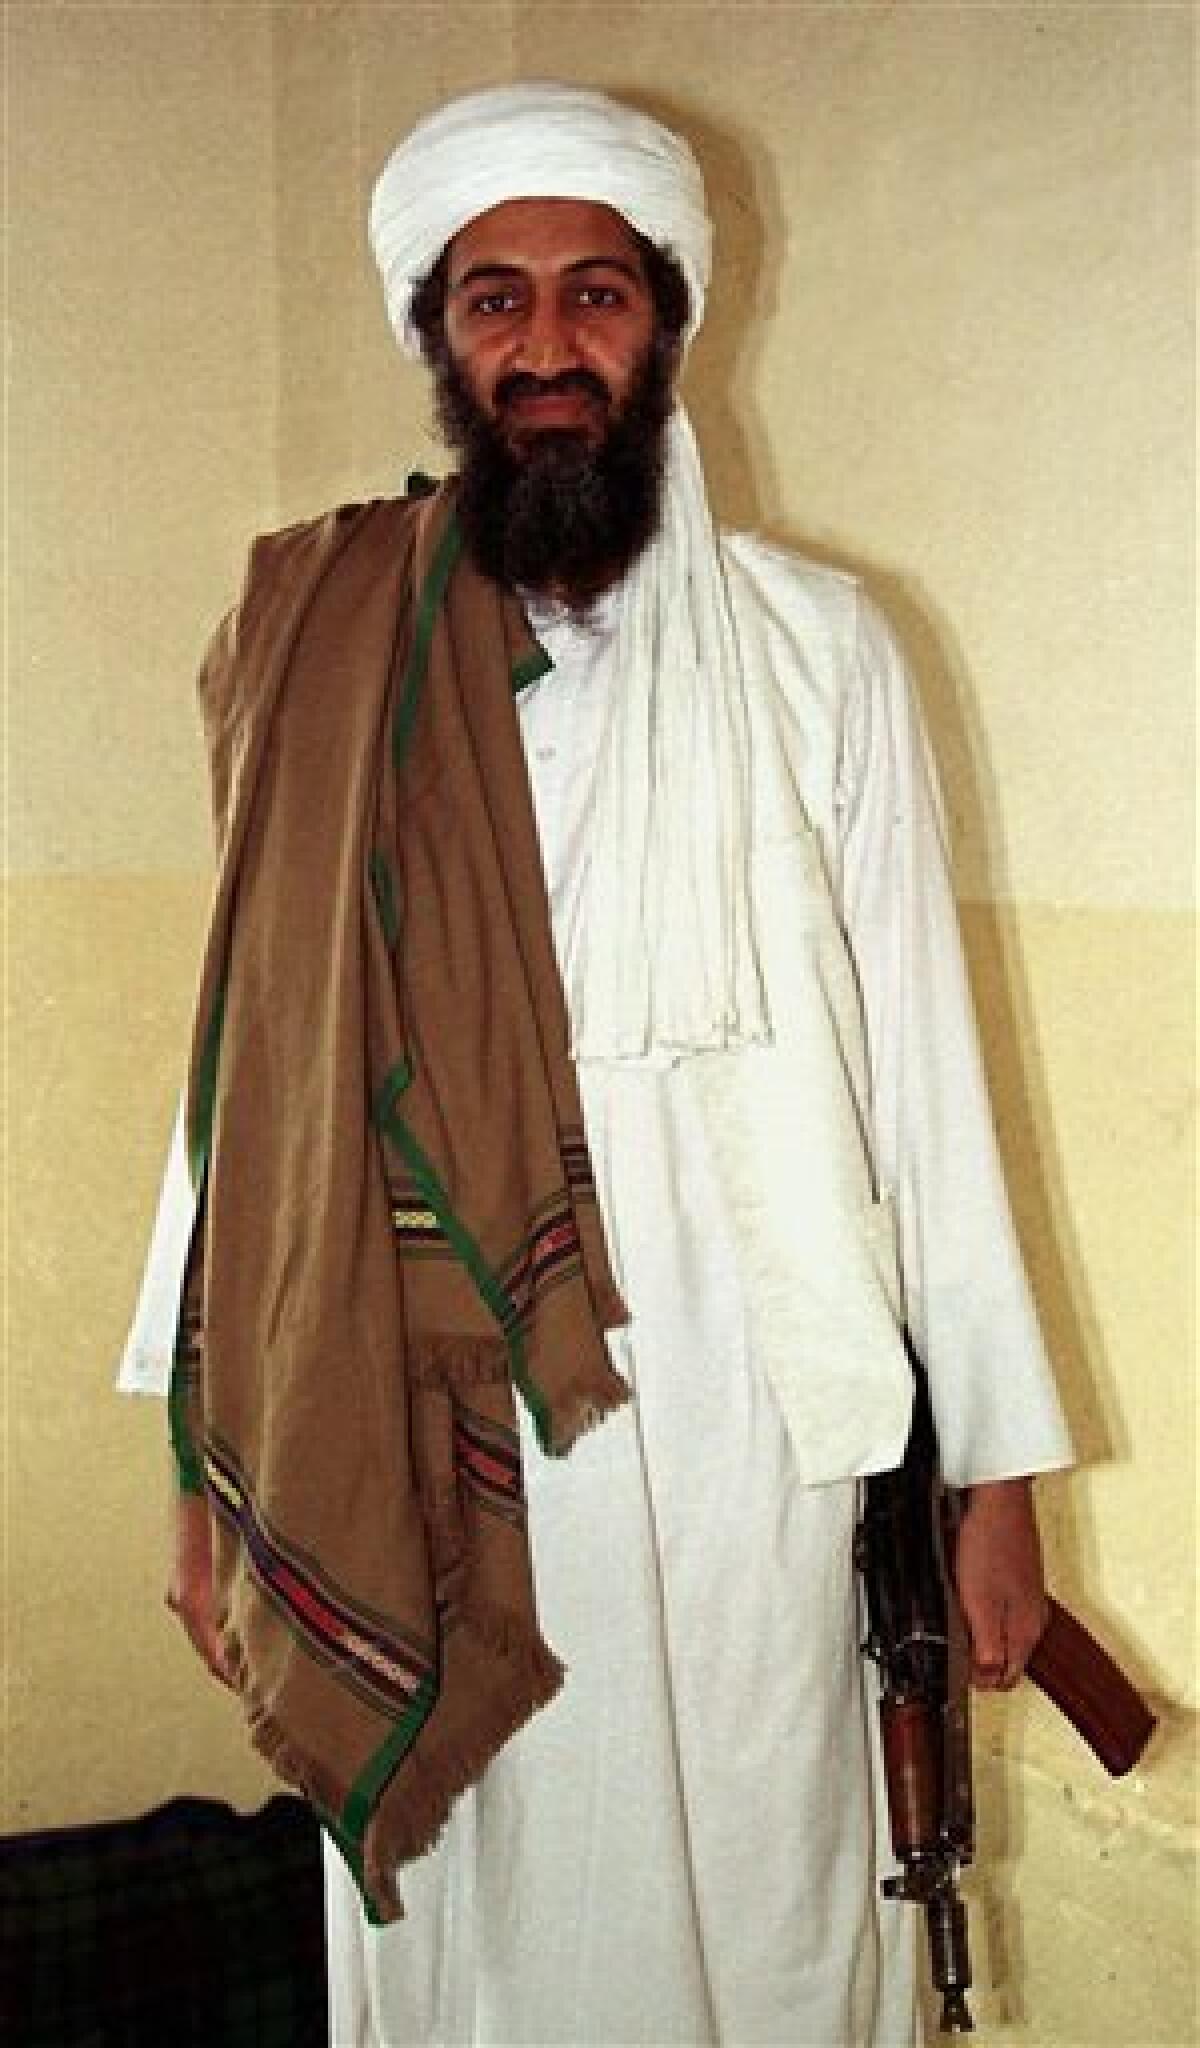 FILE- This April 1998 file photo shows Osama bin Laden in Afghanistan. Osama bin Laden threatened Americans in a new audio tape broadcast Wednesday, June 3, 2009, saying President Barack Obama inflamed hatred toward the U.S. by ordering Pakistan to crack down on militants in Swat Valley and block Islamic law in the area. (AP Photo)